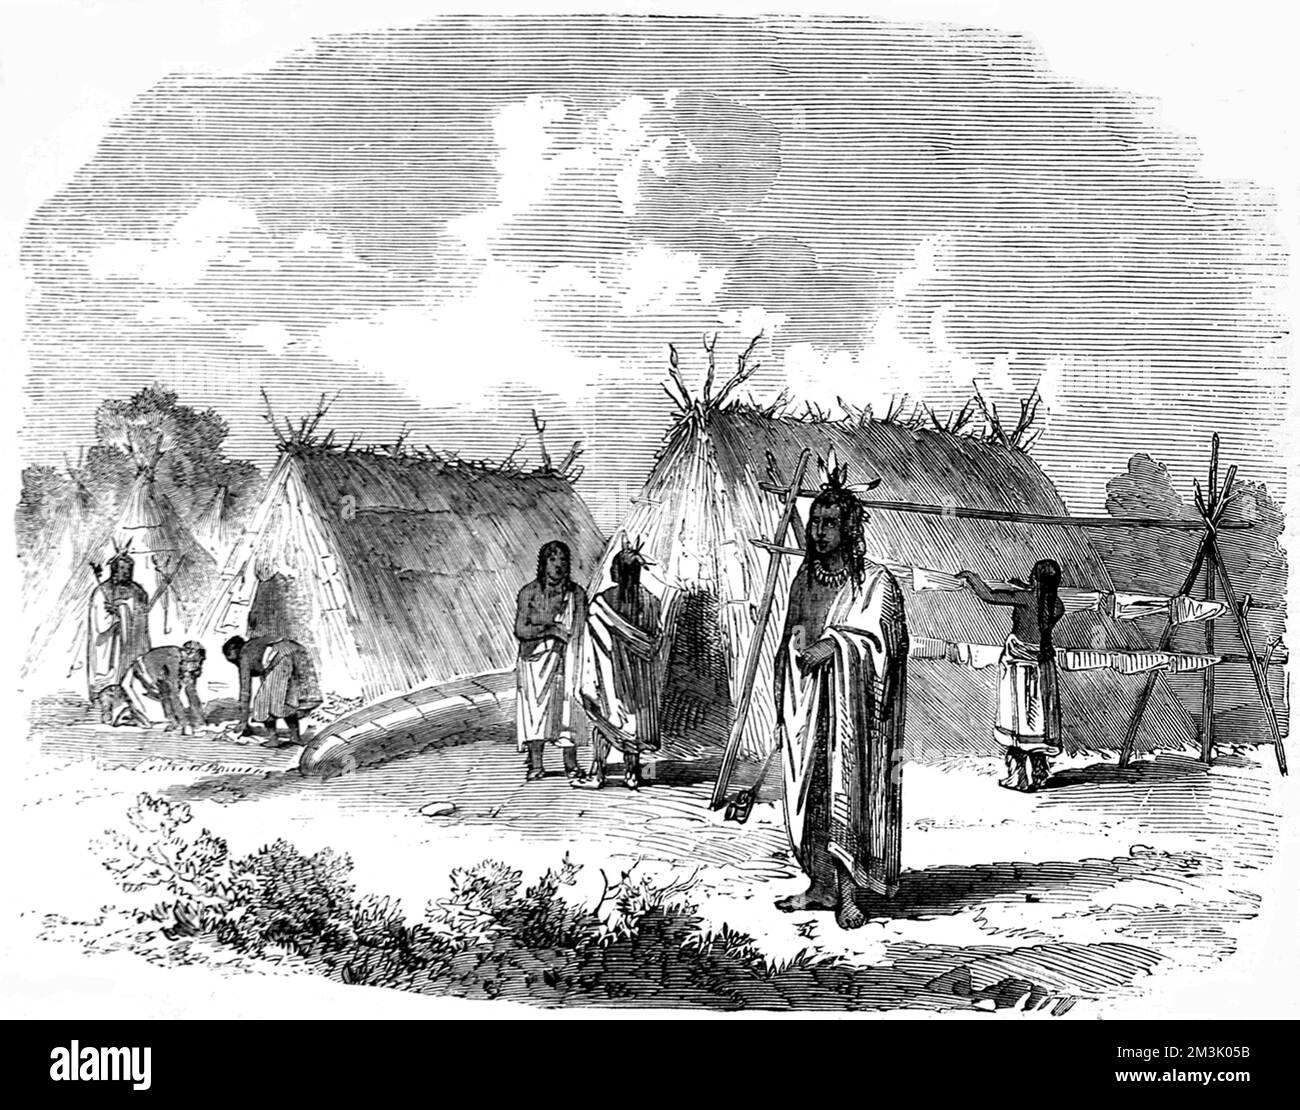 Ojibway Indians, wearing wraps and feathers in their hair, with thatch triangular huts in the background and what looks like a washing line. The Canadian government funded several expeditions to chart the Red River area in the late 1850's.     Date: 1858 Stock Photo